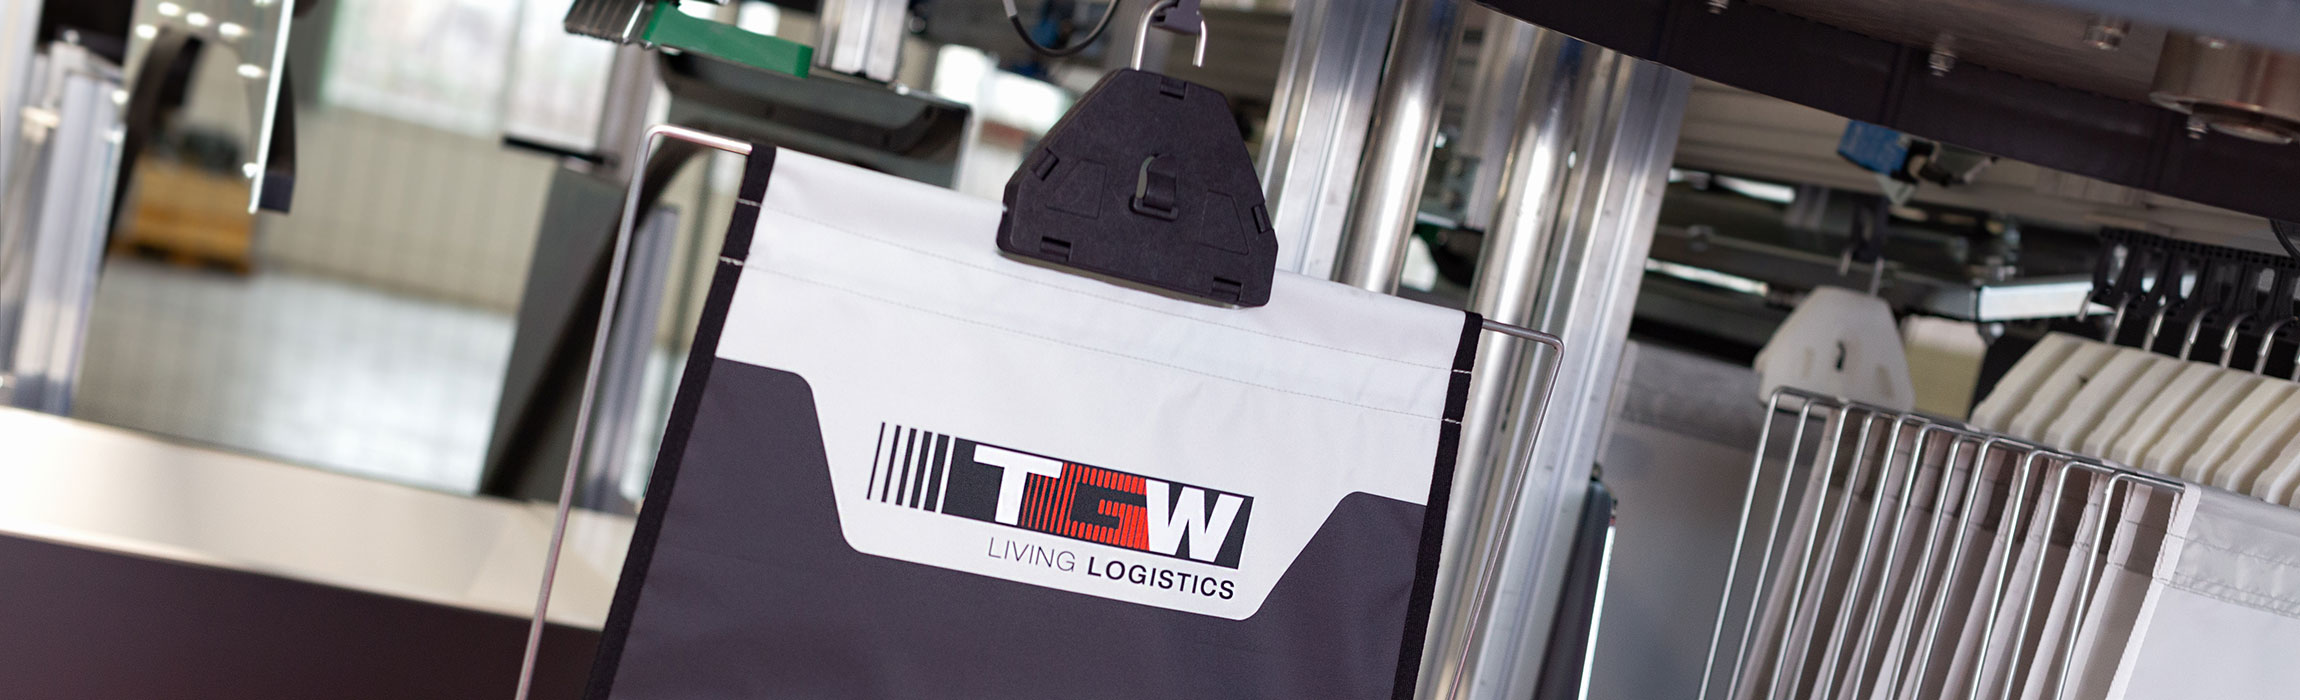 TGW offers solutions for challenges in fashion logistics.